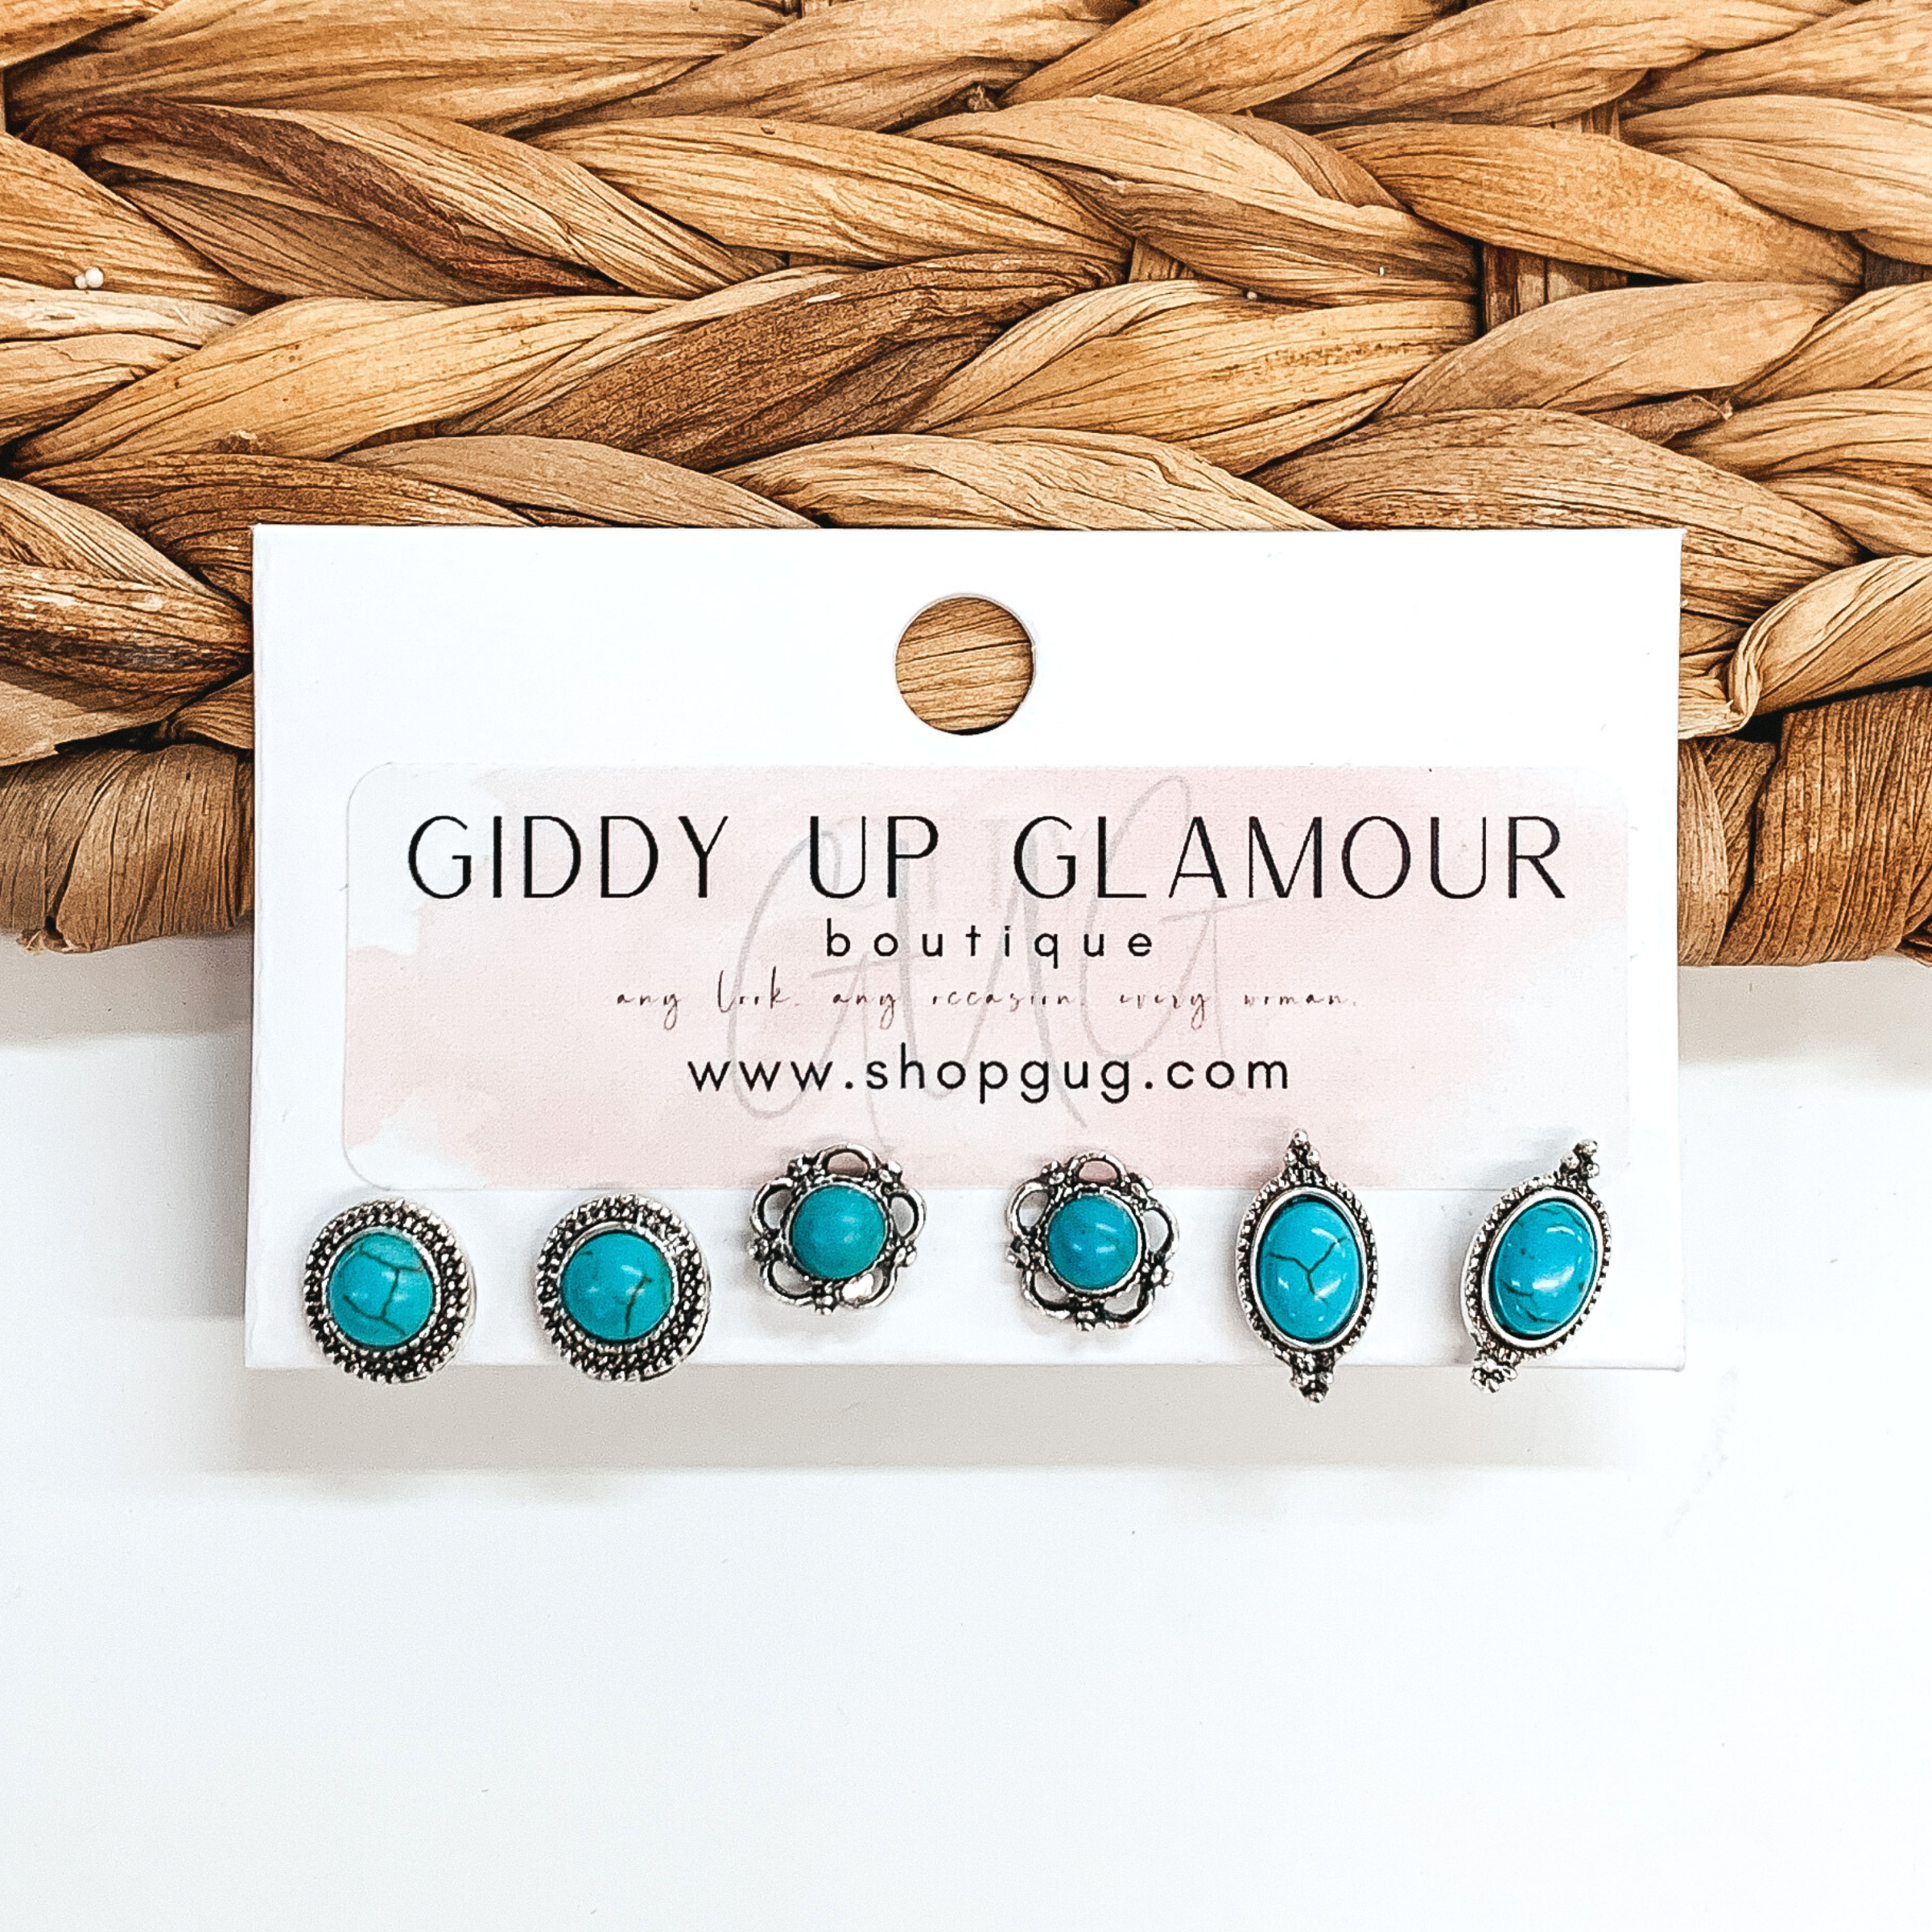 Set of three silver circle and oval stud earrings. All three pairs of earrings include turquoise colored stones with a different silver outline on each pair. These earrings are pictured on a white card holder on a white background with basket weave in the background.